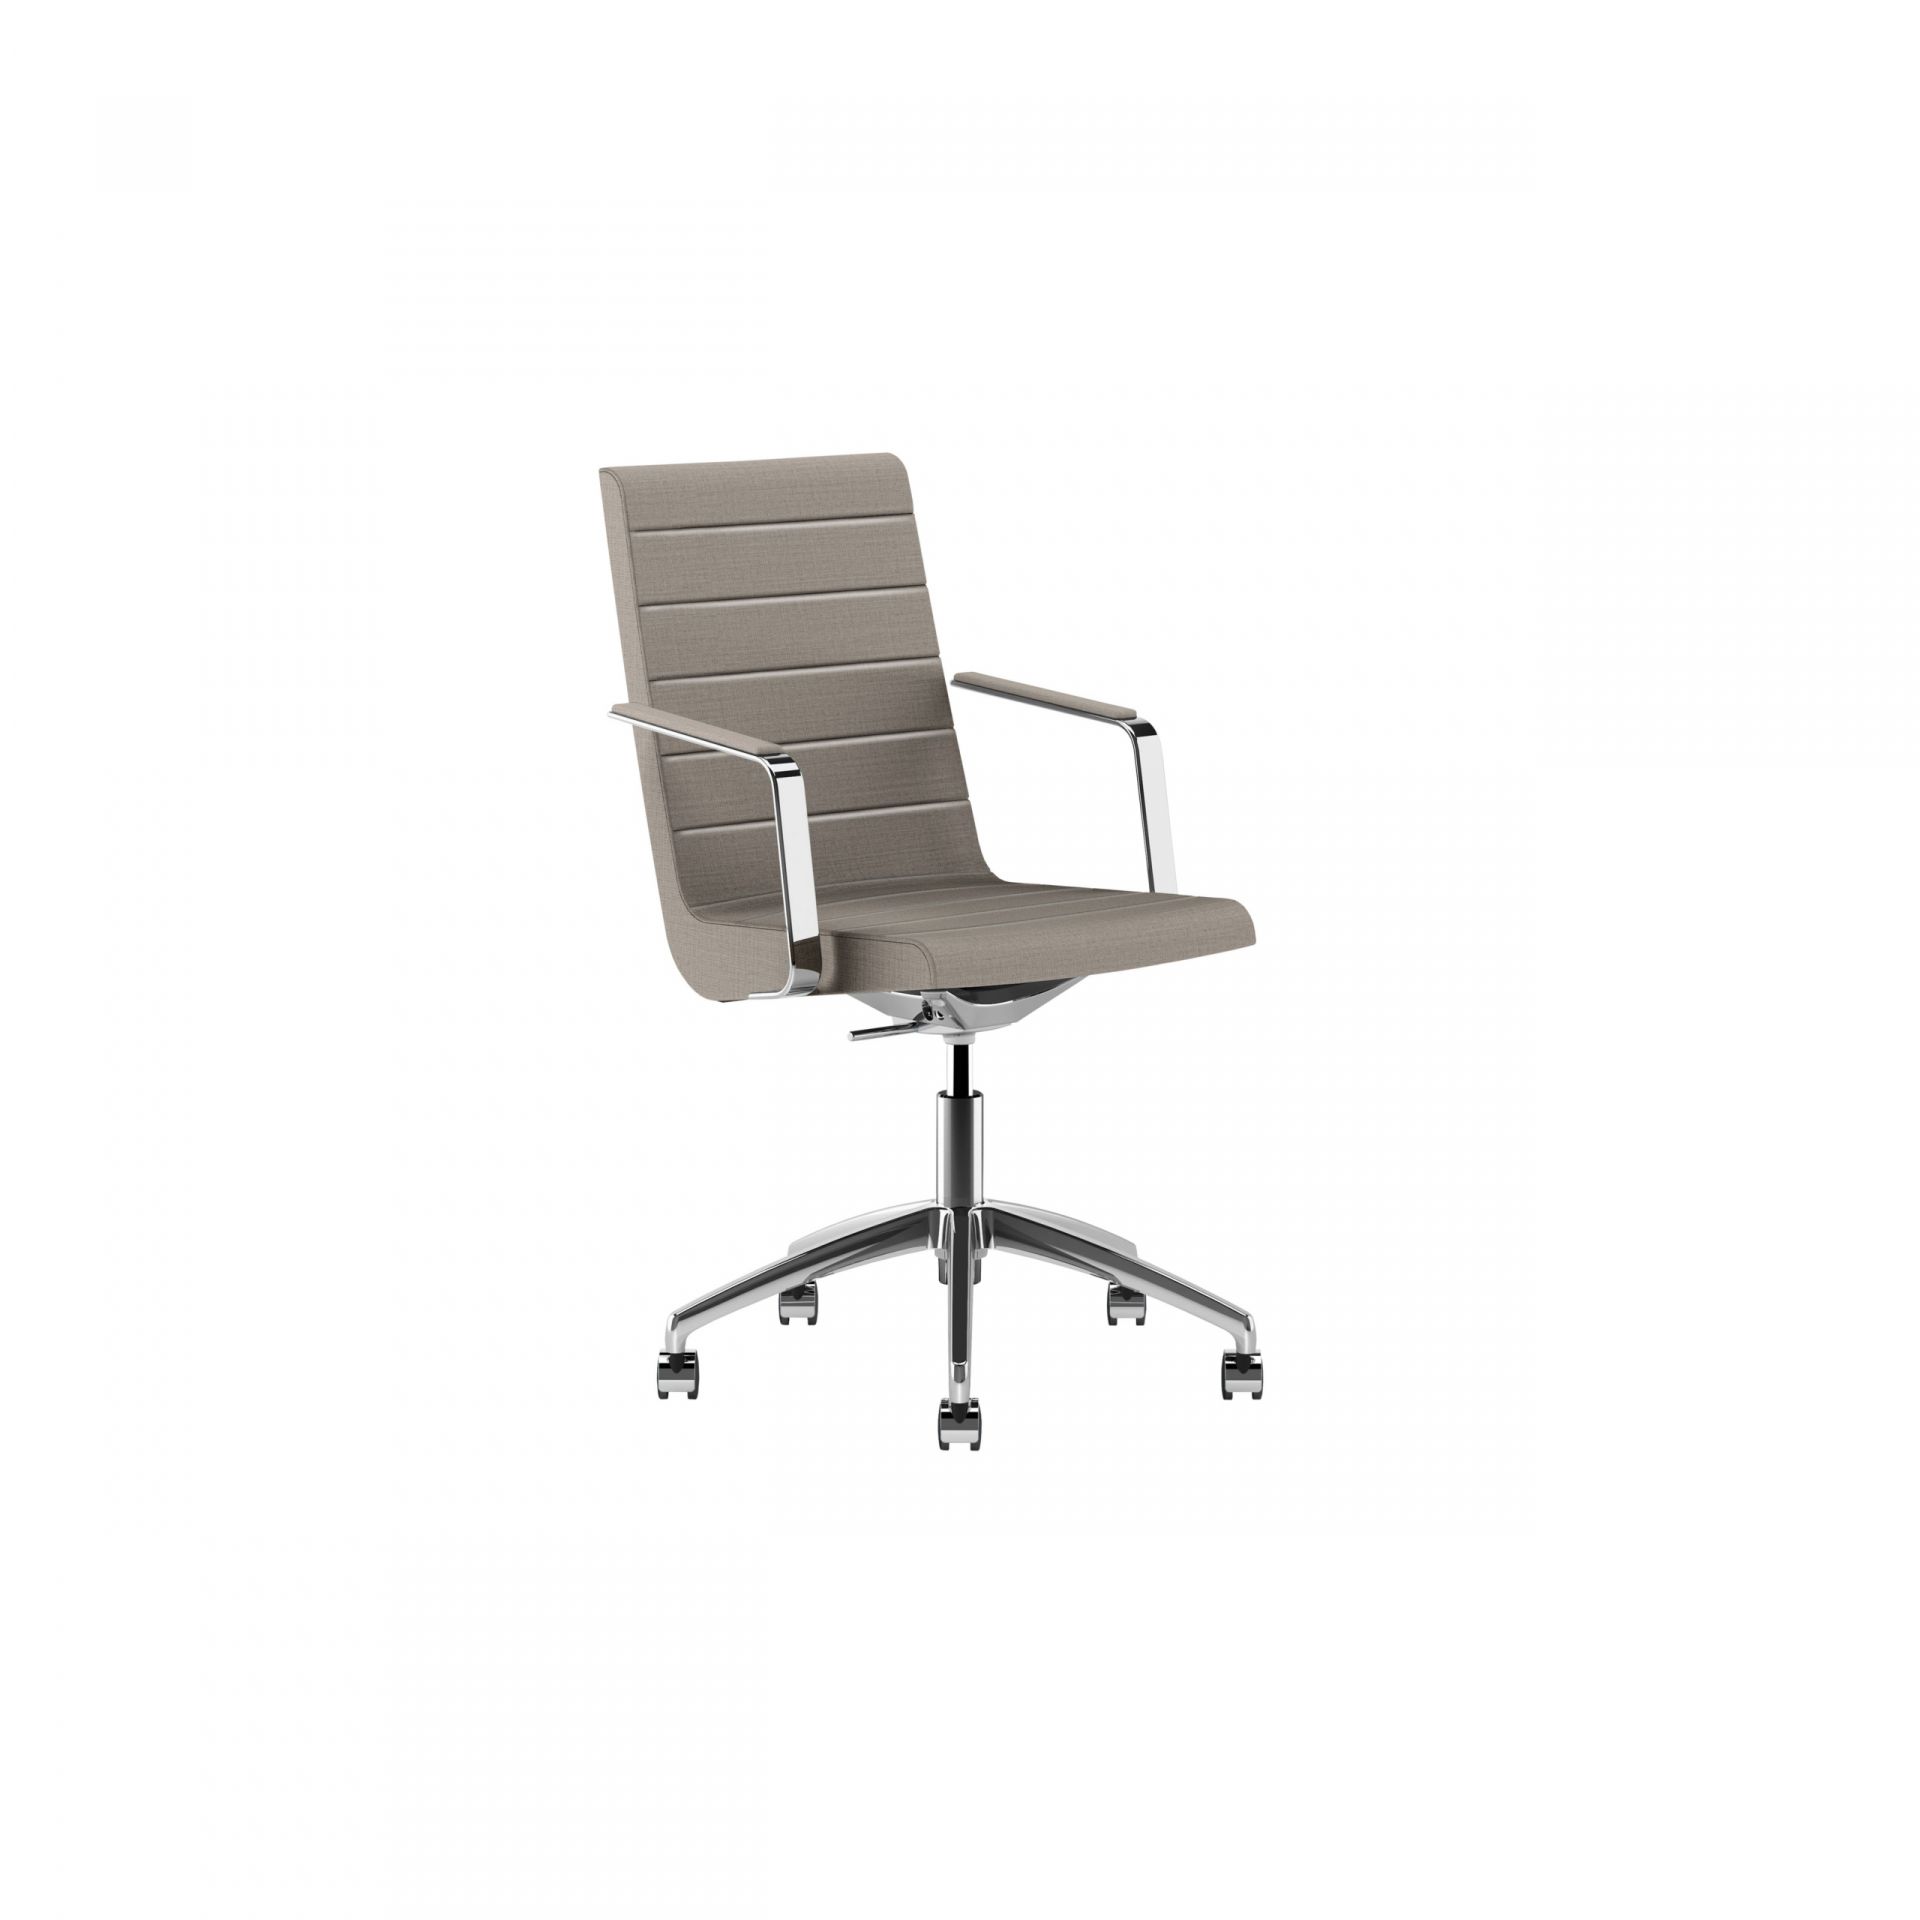 Woods Chair with swivel base product image 1